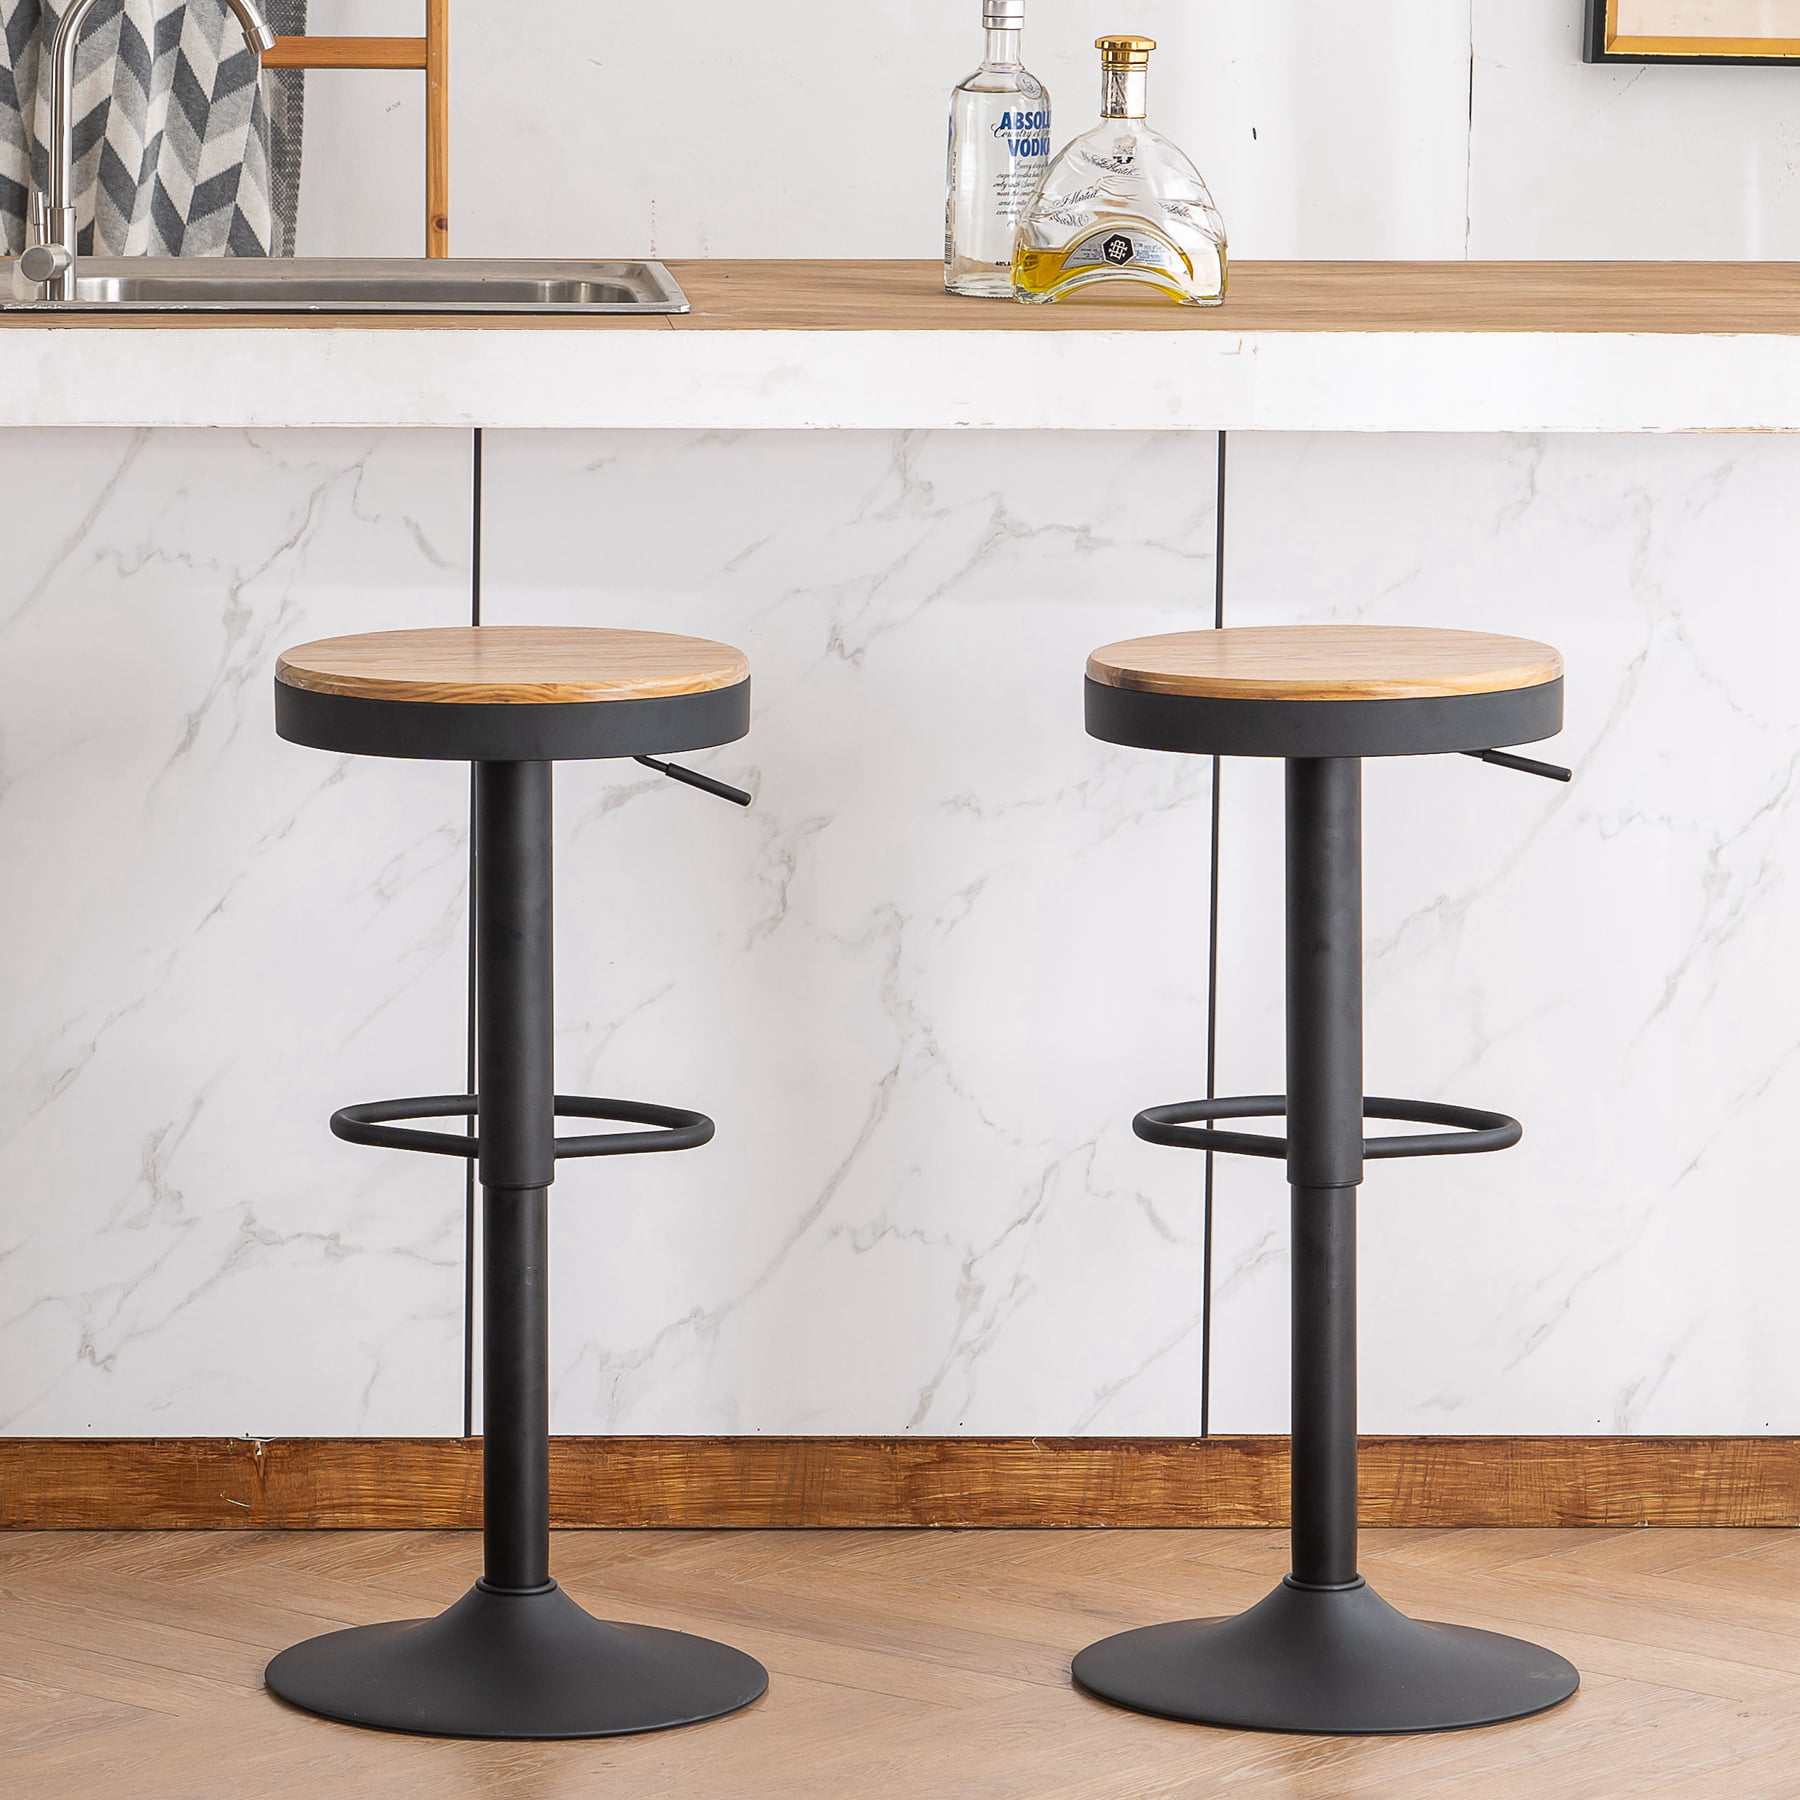 Kidol & Shellder Counter Height Bar Stools Set of 2 for Kitchen Island Solid Woodden Seat Adjustable Barstools,Modern Industrial Vintage Bar Chairs 360 ° Swivel,Arc Black 